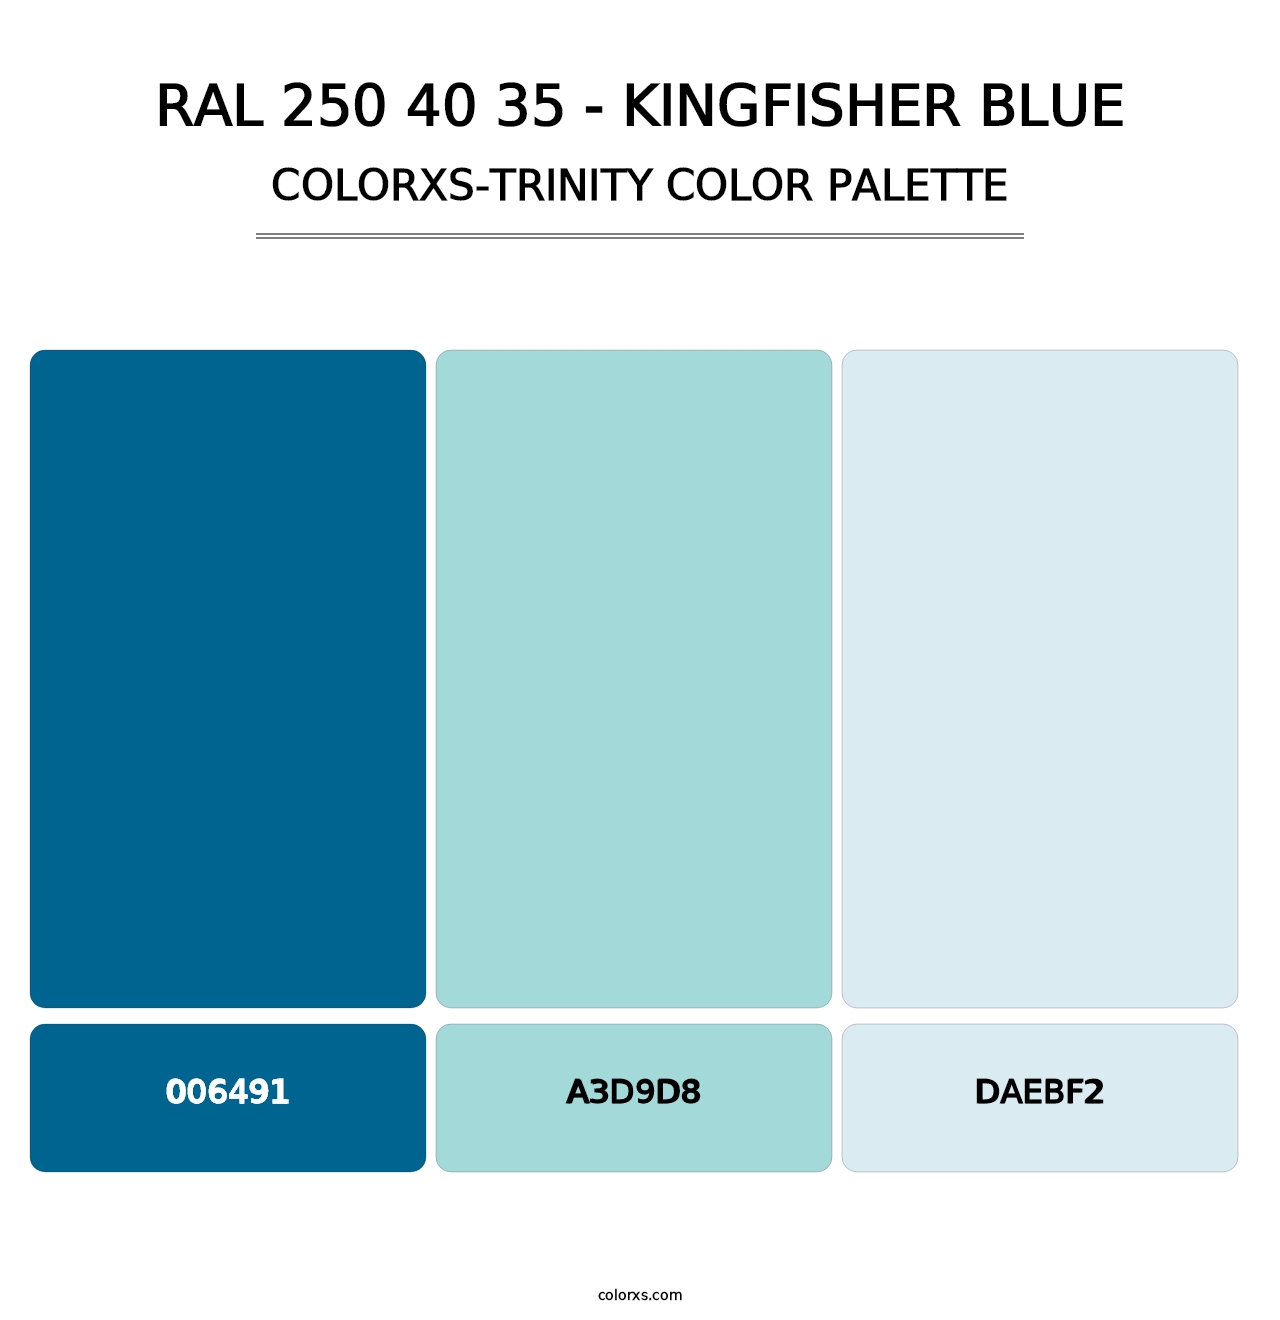 RAL 250 40 35 - Kingfisher Blue - Colorxs Trinity Palette